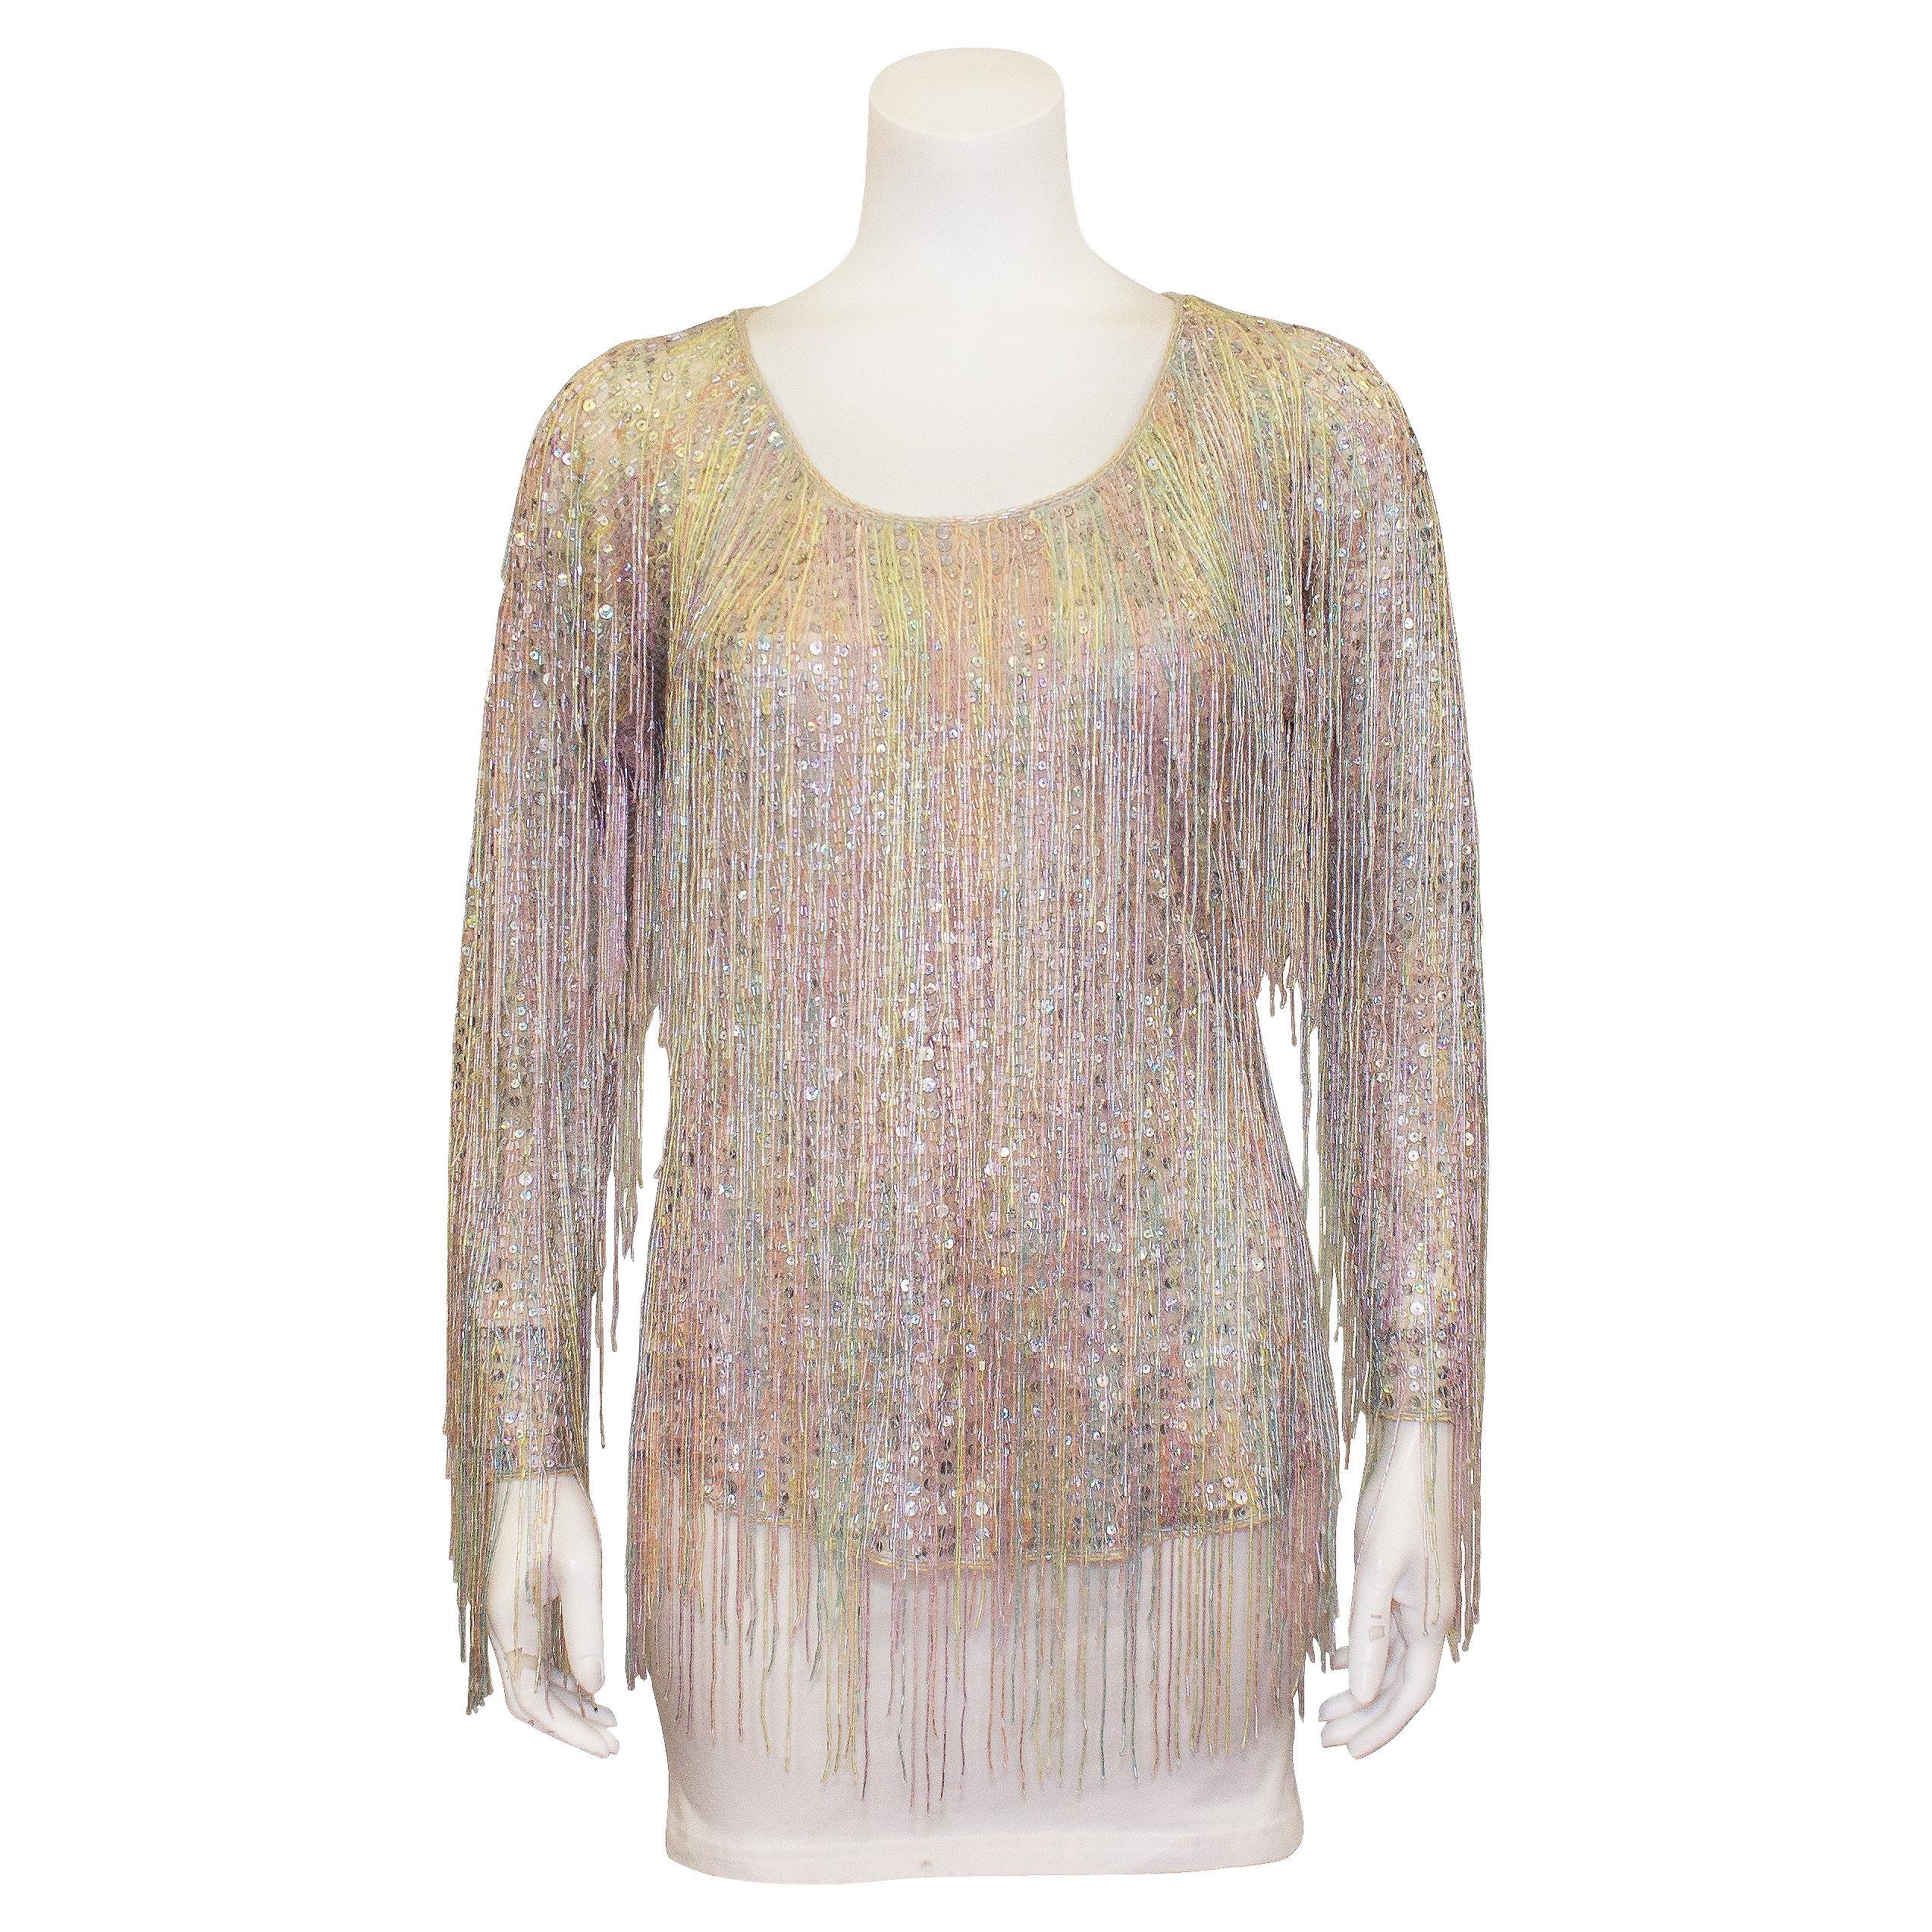 1970s Halston Sequin and Beaded Fringe Top